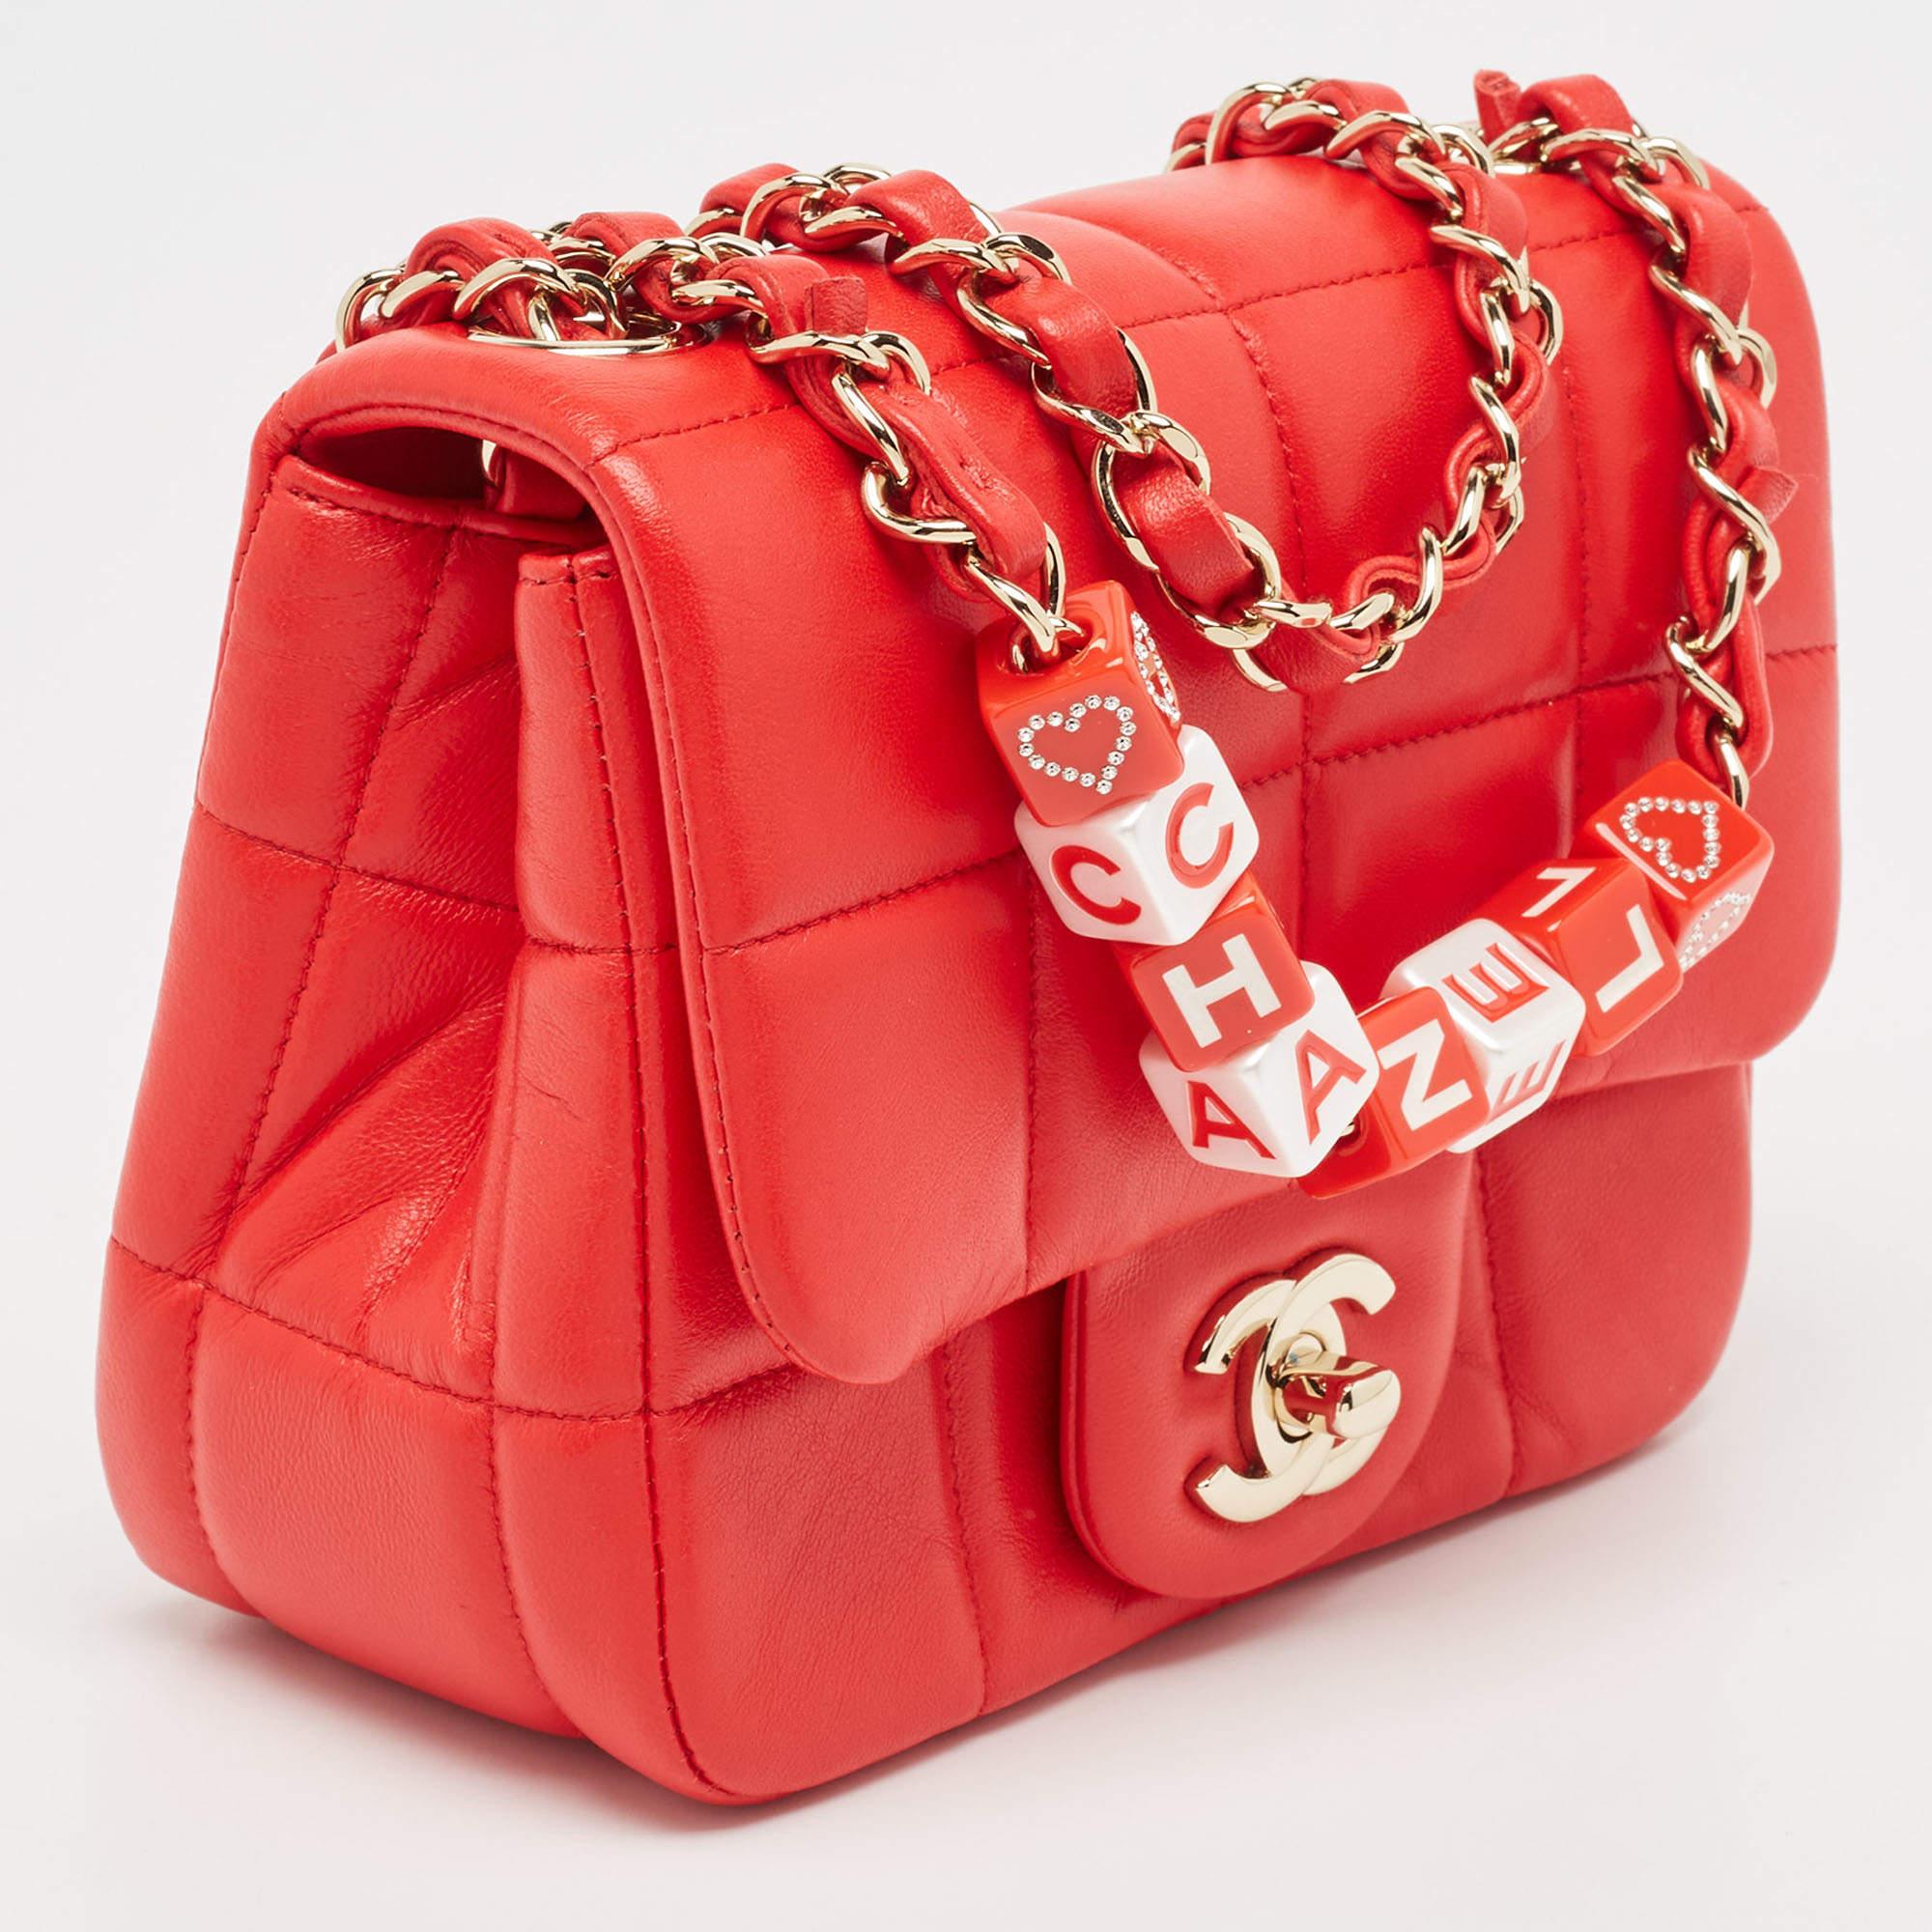 Women's Chanel Red Quilted Leather Mini Monacoco Square Flap Bag